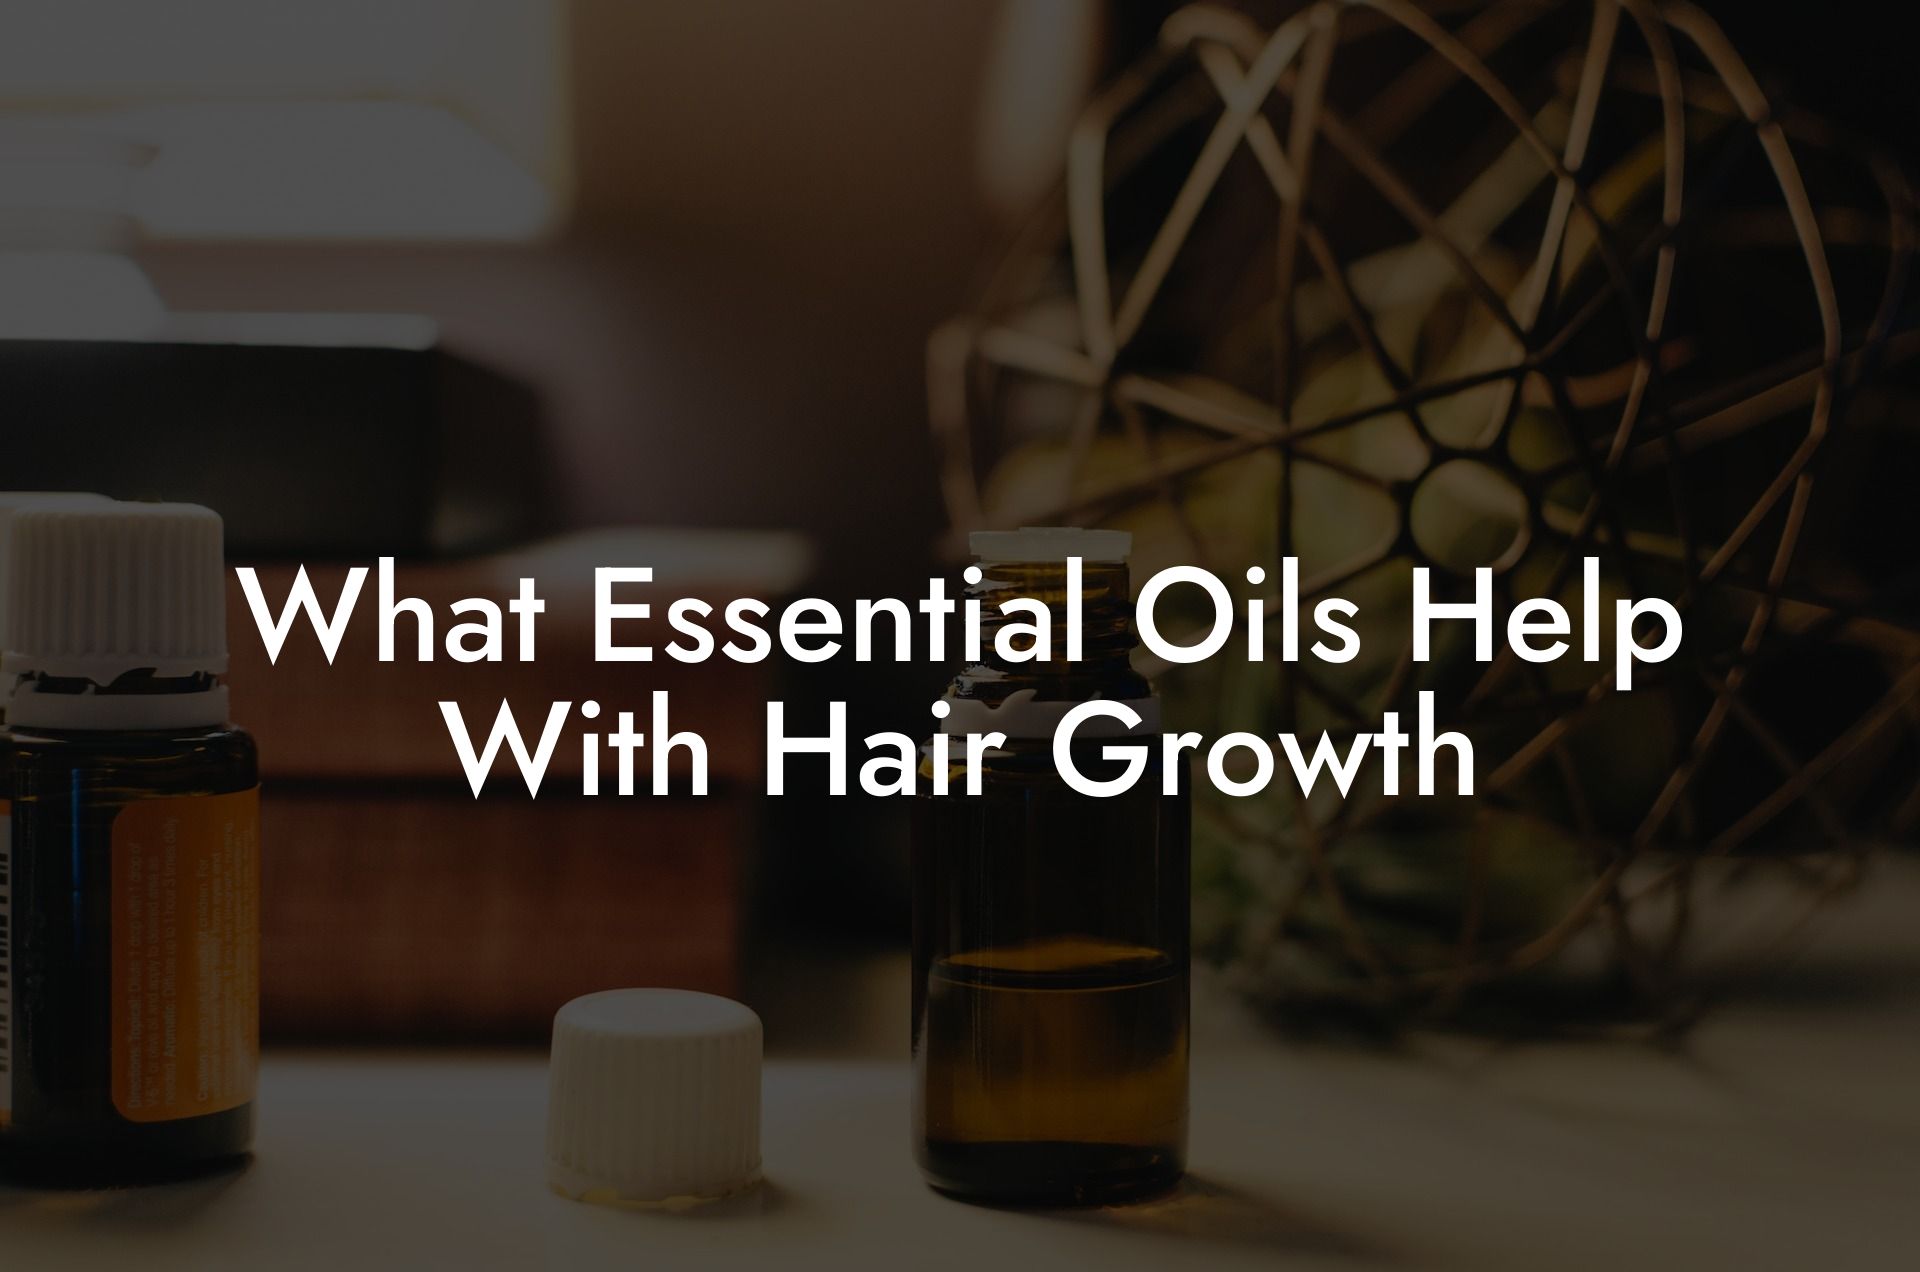 What Essential Oils Help With Hair Growth